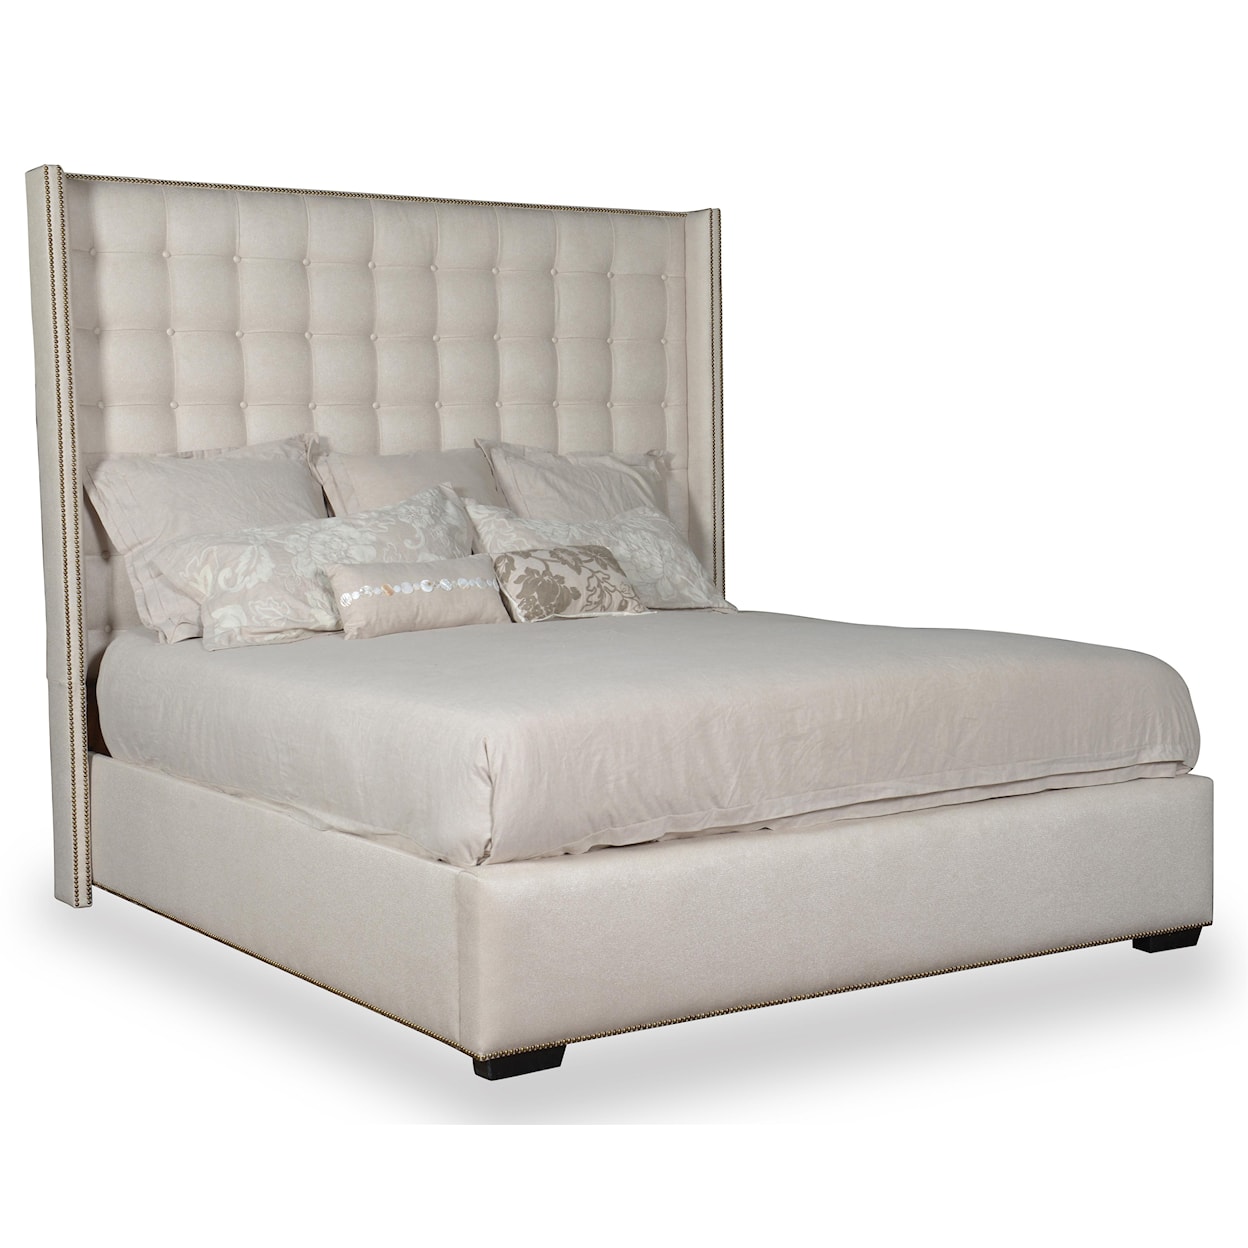 A.R.T. Furniture Inc Classic King Upholstered Shelter Bed